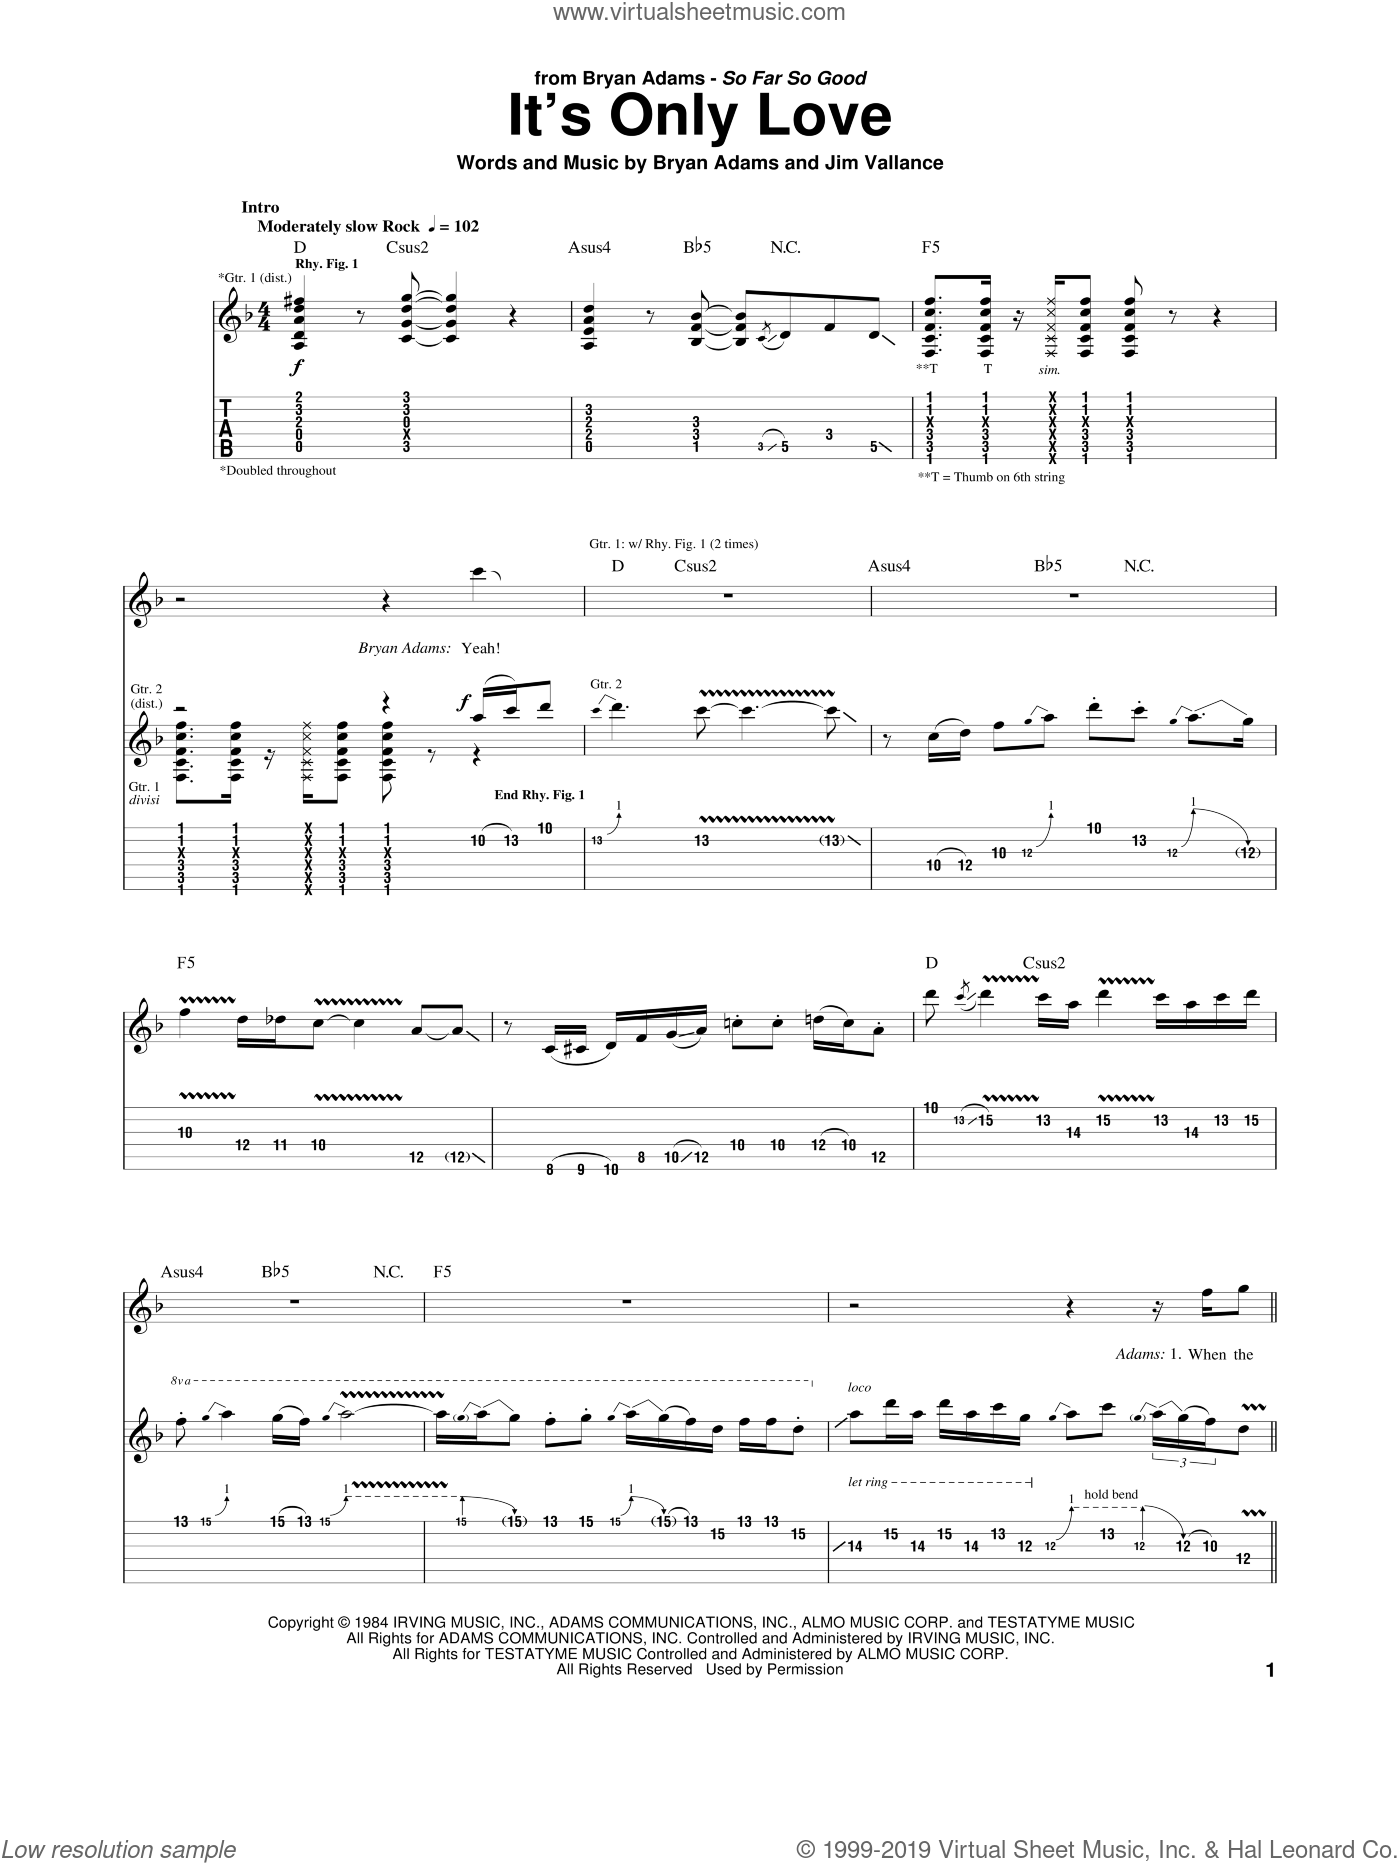 You Only Live Once Sheet Music | The Strokes | Guitar Tab